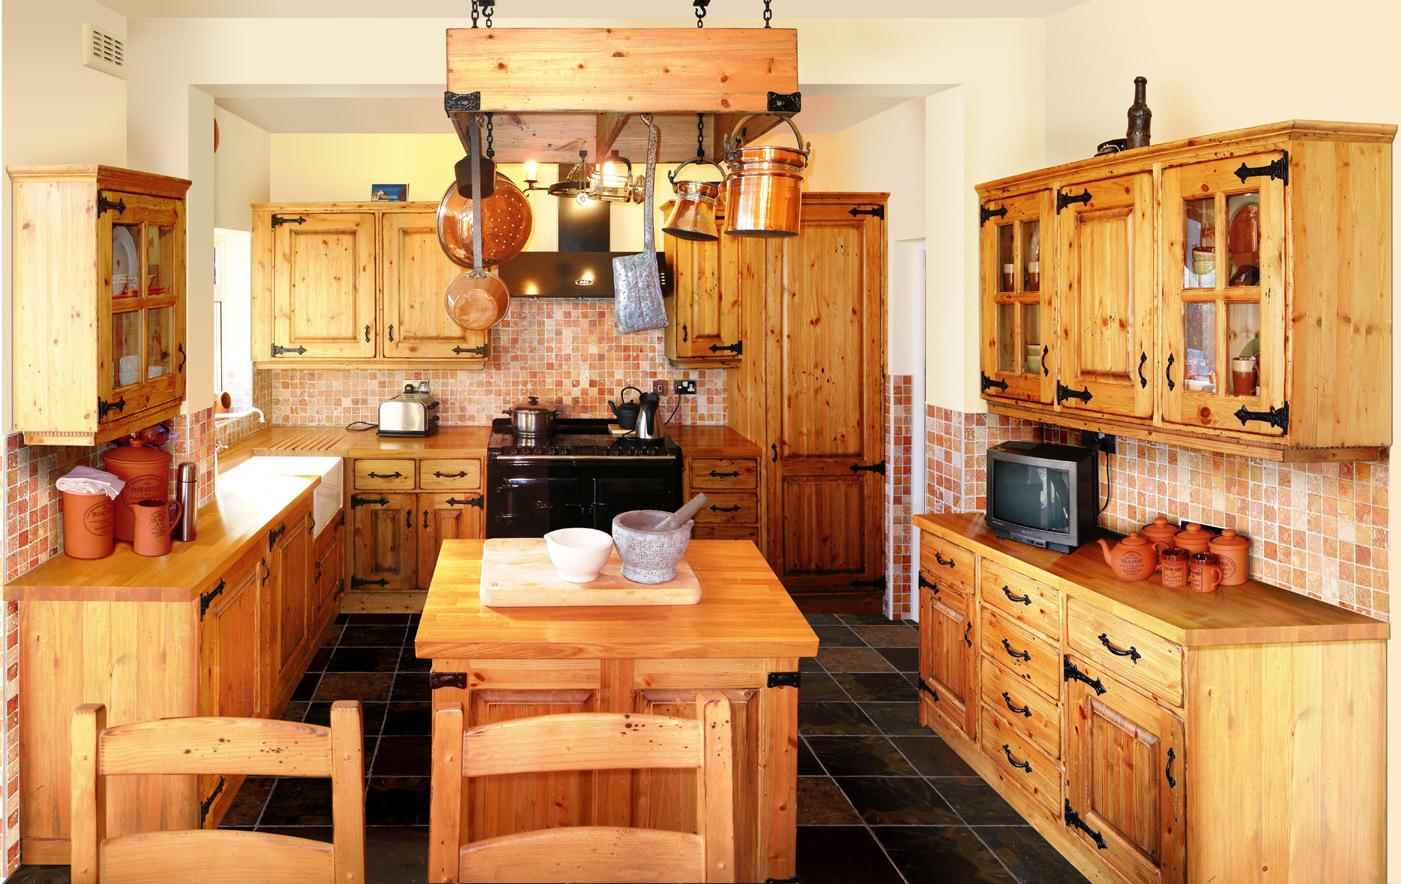 an example of an unusual design of a rustic kitchen